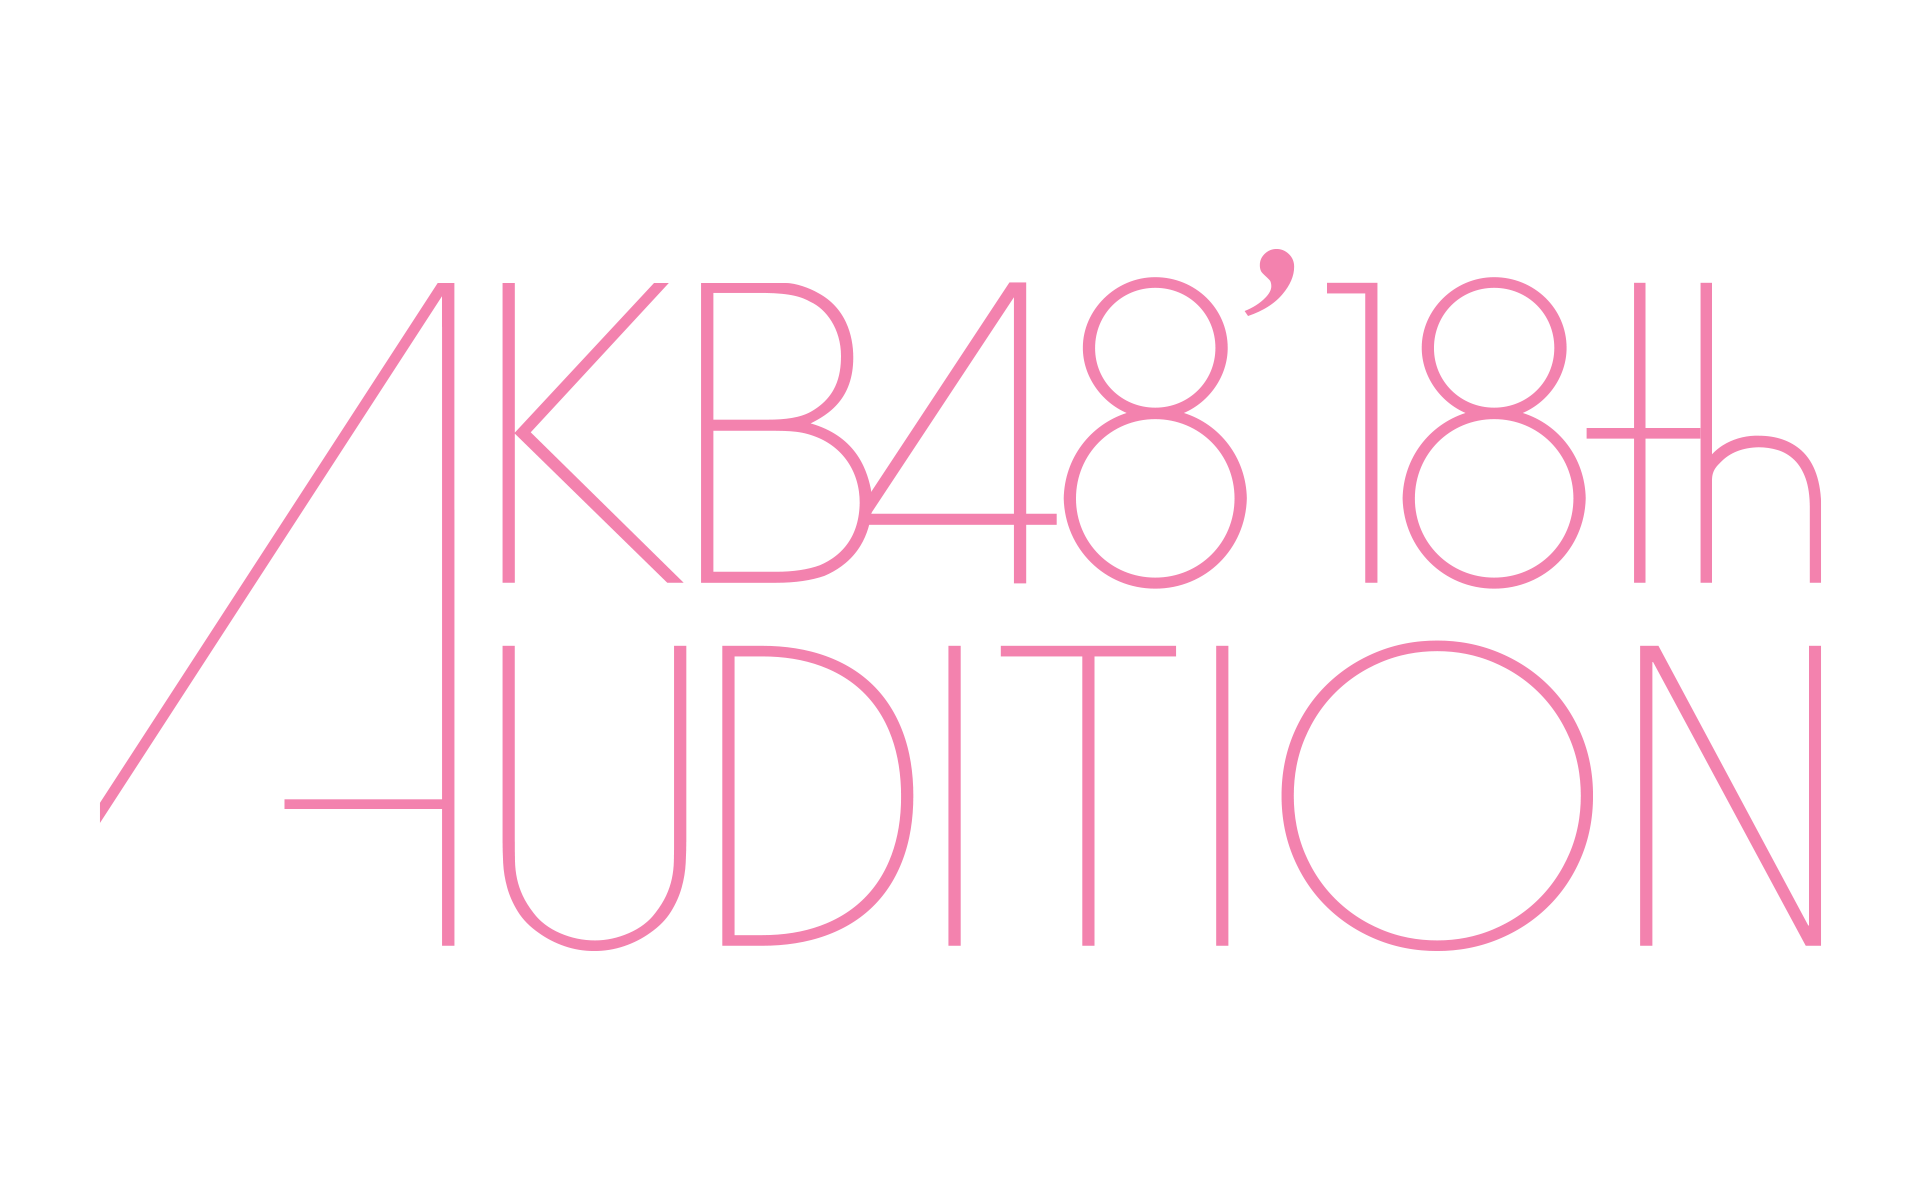 AKB48 18th AUDITION